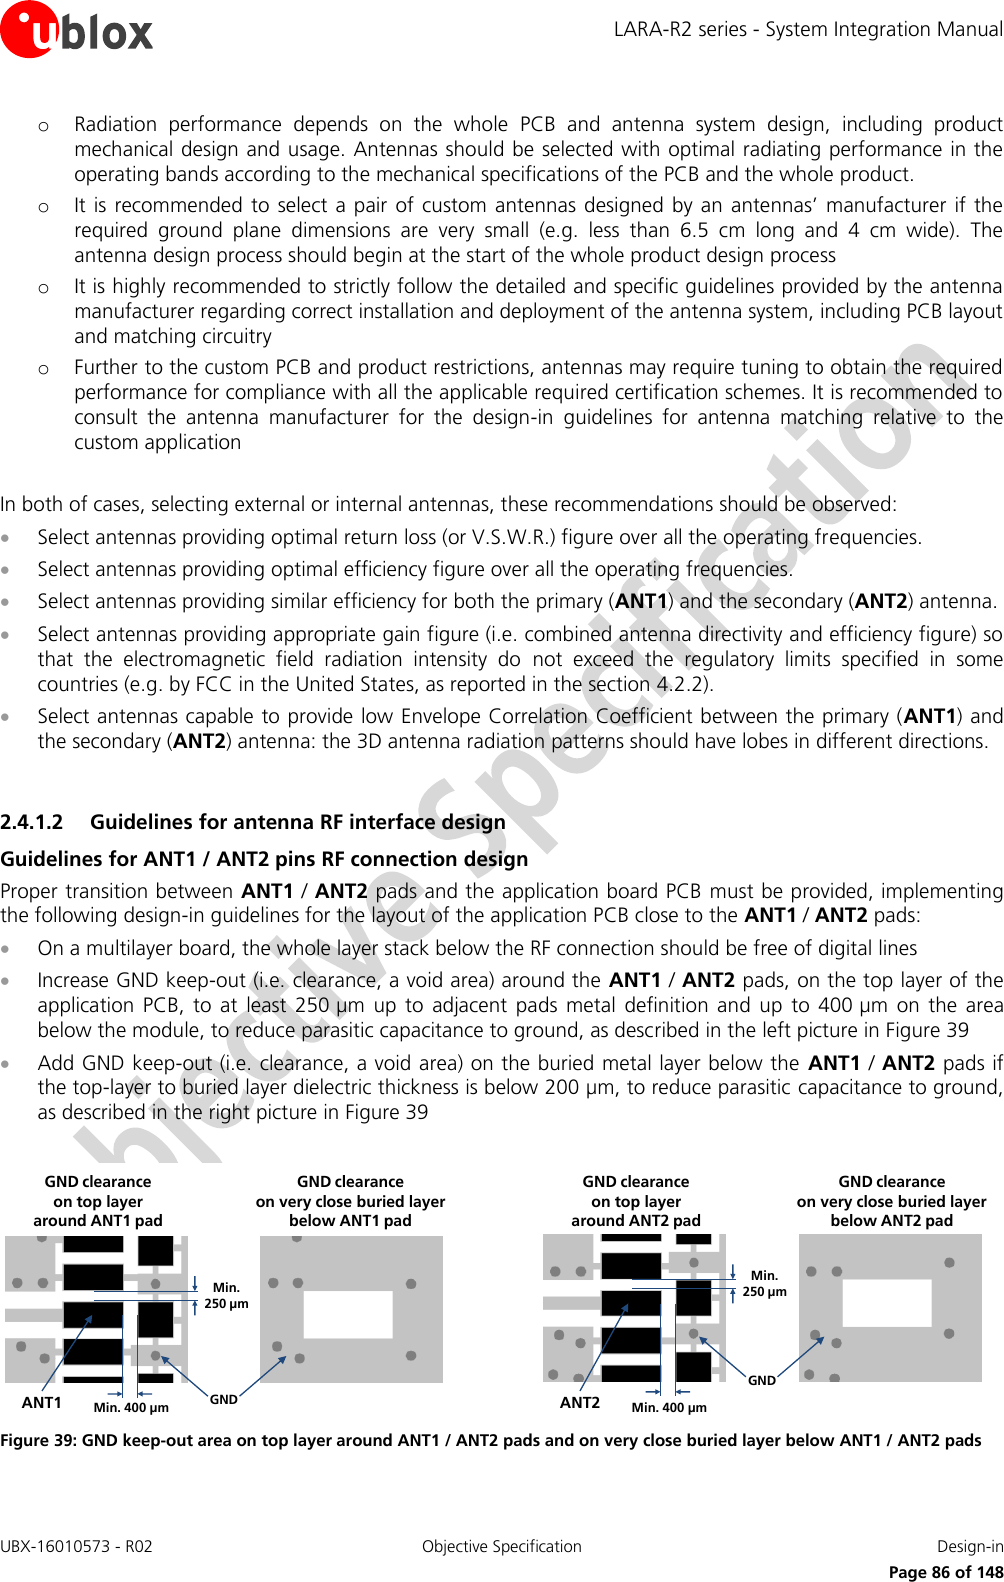 LARA-R2 series - System Integration Manual UBX-16010573 - R02  Objective Specification  Design-in     Page 86 of 148 o Radiation  performance  depends  on  the  whole  PCB  and  antenna  system  design,  including  product mechanical design and usage. Antennas should be selected with optimal radiating performance in the operating bands according to the mechanical specifications of the PCB and the whole product. o It is recommended to  select a pair  of custom antennas  designed  by  an antennas’  manufacturer  if the required  ground  plane  dimensions  are  very  small  (e.g.  less  than  6.5  cm  long  and  4  cm  wide).  The antenna design process should begin at the start of the whole product design process o It is highly recommended to strictly follow the detailed and specific guidelines provided by the antenna manufacturer regarding correct installation and deployment of the antenna system, including PCB layout and matching circuitry o Further to the custom PCB and product restrictions, antennas may require tuning to obtain the required performance for compliance with all the applicable required certification schemes. It is recommended to consult  the  antenna  manufacturer  for  the  design-in  guidelines  for  antenna  matching  relative  to  the custom application  In both of cases, selecting external or internal antennas, these recommendations should be observed:  Select antennas providing optimal return loss (or V.S.W.R.) figure over all the operating frequencies.  Select antennas providing optimal efficiency figure over all the operating frequencies.  Select antennas providing similar efficiency for both the primary (ANT1) and the secondary (ANT2) antenna.  Select antennas providing appropriate gain figure (i.e. combined antenna directivity and efficiency figure) so that  the  electromagnetic  field  radiation  intensity  do  not  exceed  the  regulatory  limits  specified  in  some countries (e.g. by FCC in the United States, as reported in the section 4.2.2).  Select antennas capable to provide low Envelope Correlation Coefficient between the primary (ANT1) and the secondary (ANT2) antenna: the 3D antenna radiation patterns should have lobes in different directions.  2.4.1.2 Guidelines for antenna RF interface design Guidelines for ANT1 / ANT2 pins RF connection design Proper transition between ANT1 / ANT2 pads and the application board PCB must be provided, implementing the following design-in guidelines for the layout of the application PCB close to the ANT1 / ANT2 pads:  On a multilayer board, the whole layer stack below the RF connection should be free of digital lines  Increase GND keep-out (i.e. clearance, a void area) around the ANT1 / ANT2 pads, on the top layer of the application  PCB,  to  at  least  250 µm  up to  adjacent  pads  metal  definition  and  up  to  400 µm  on  the  area below the module, to reduce parasitic capacitance to ground, as described in the left picture in Figure 39  Add GND keep-out (i.e. clearance, a void area) on the buried metal layer below the  ANT1 / ANT2 pads if the top-layer to buried layer dielectric thickness is below 200 µm, to reduce parasitic capacitance to ground, as described in the right picture in Figure 39  Min. 250 µmMin. 400 µm GNDANT1GND clearance on very close buried layerbelow ANT1 padGND clearance on top layer around ANT1 padMin. 250 µmMin. 400 µmGNDANT2GND clearance on very close buried layerbelow ANT2 padGND clearance on top layer around ANT2 pad Figure 39: GND keep-out area on top layer around ANT1 / ANT2 pads and on very close buried layer below ANT1 / ANT2 pads 